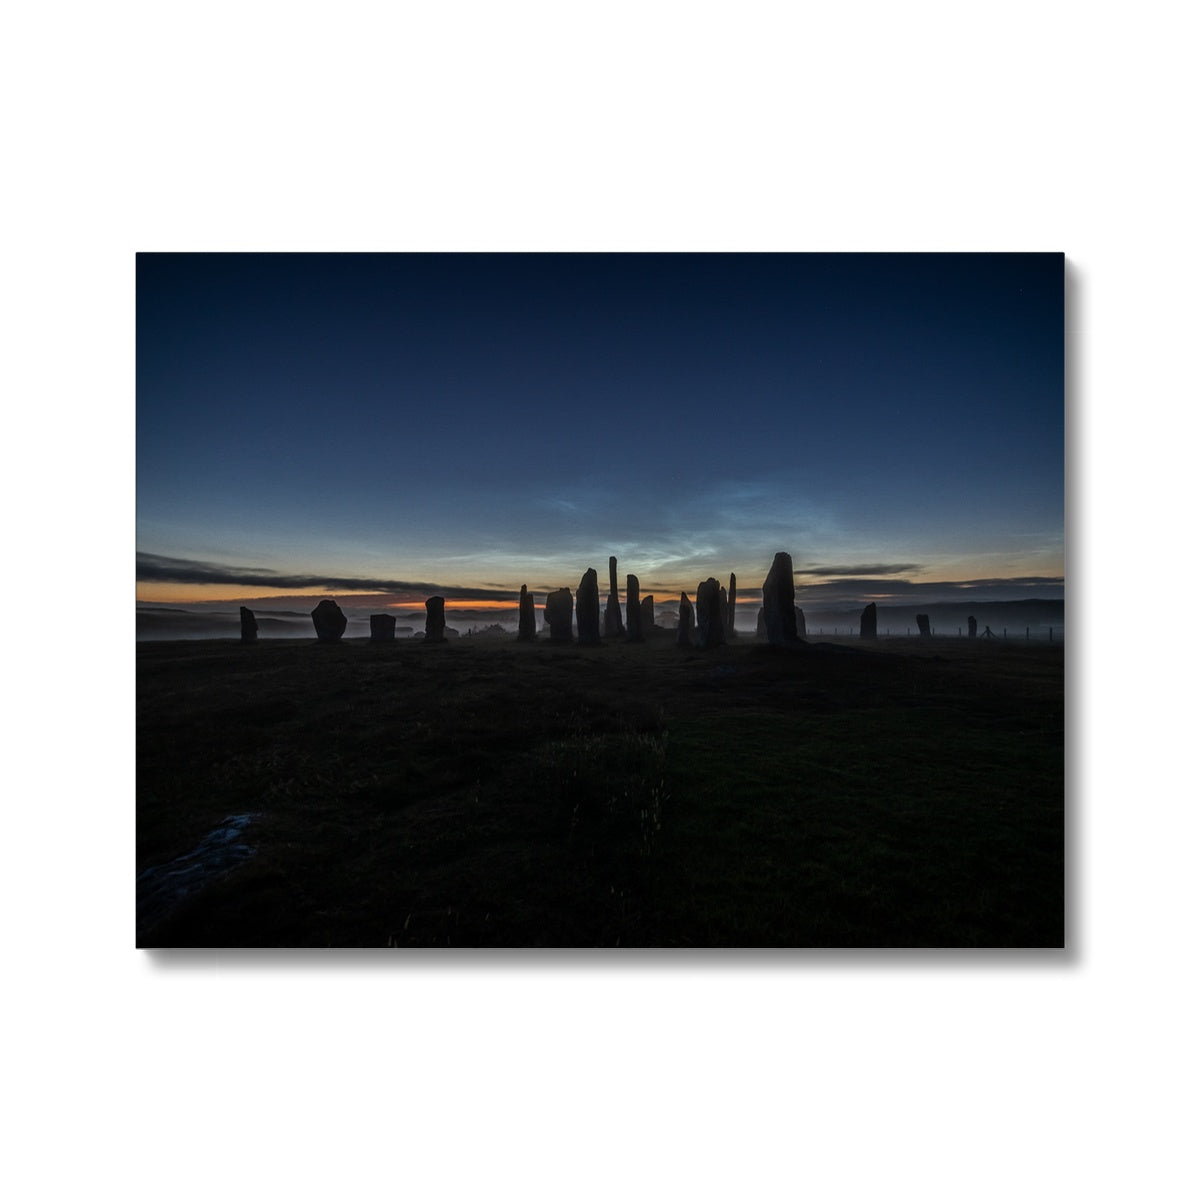 Callanish Stones and Noctilucent Clouds Canvas